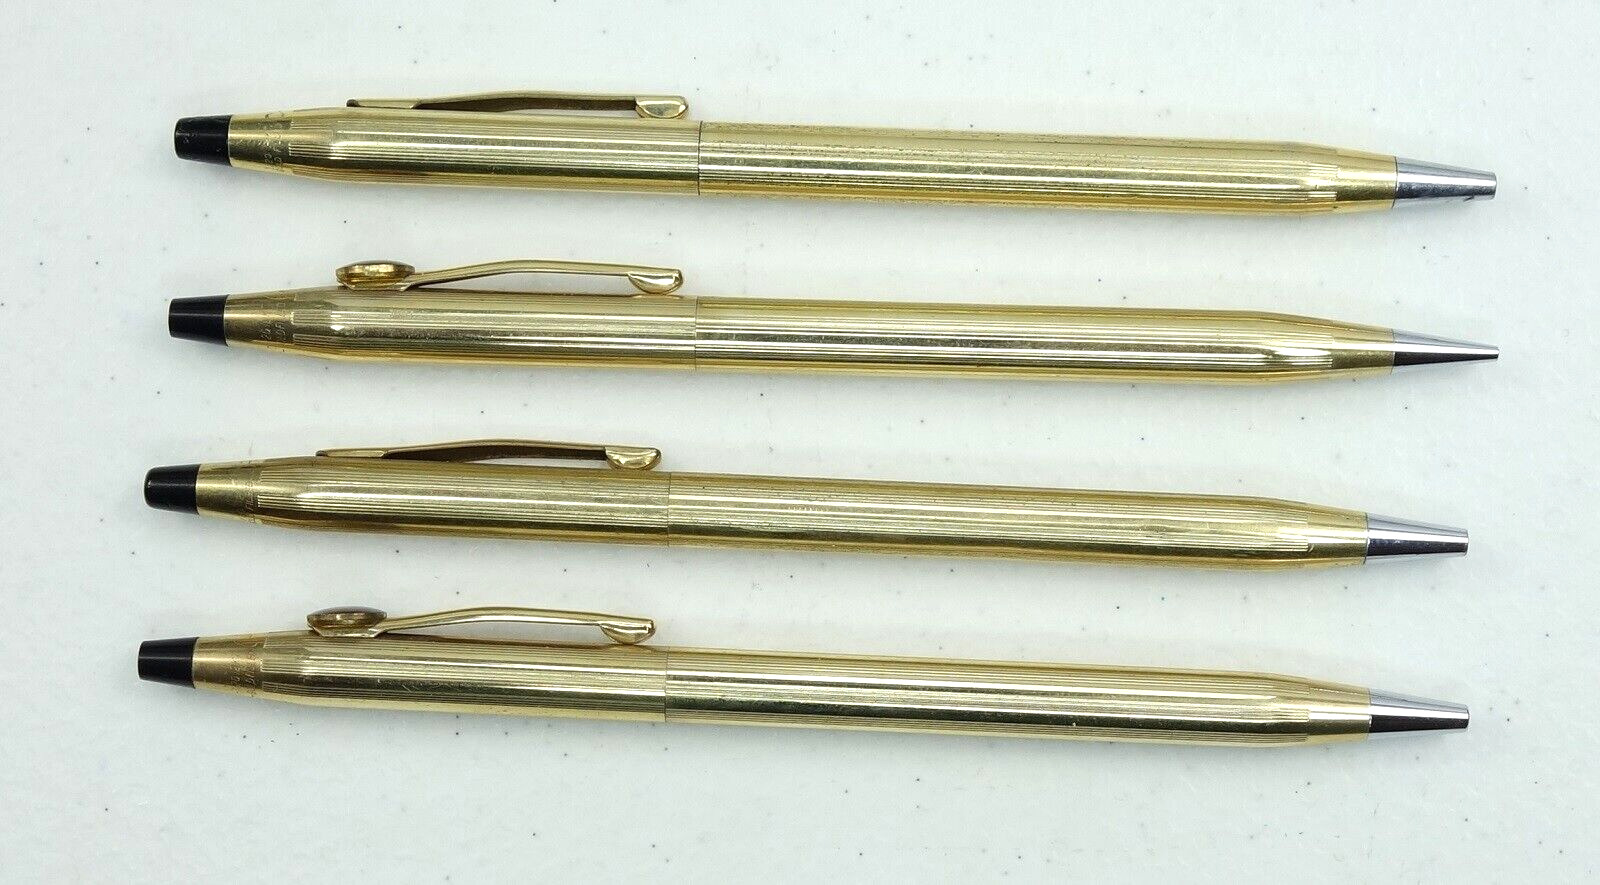 Lot of Cross 1/20 12k Gold Filled Ballpoint Pens & Mechanical Pencil Made in USA